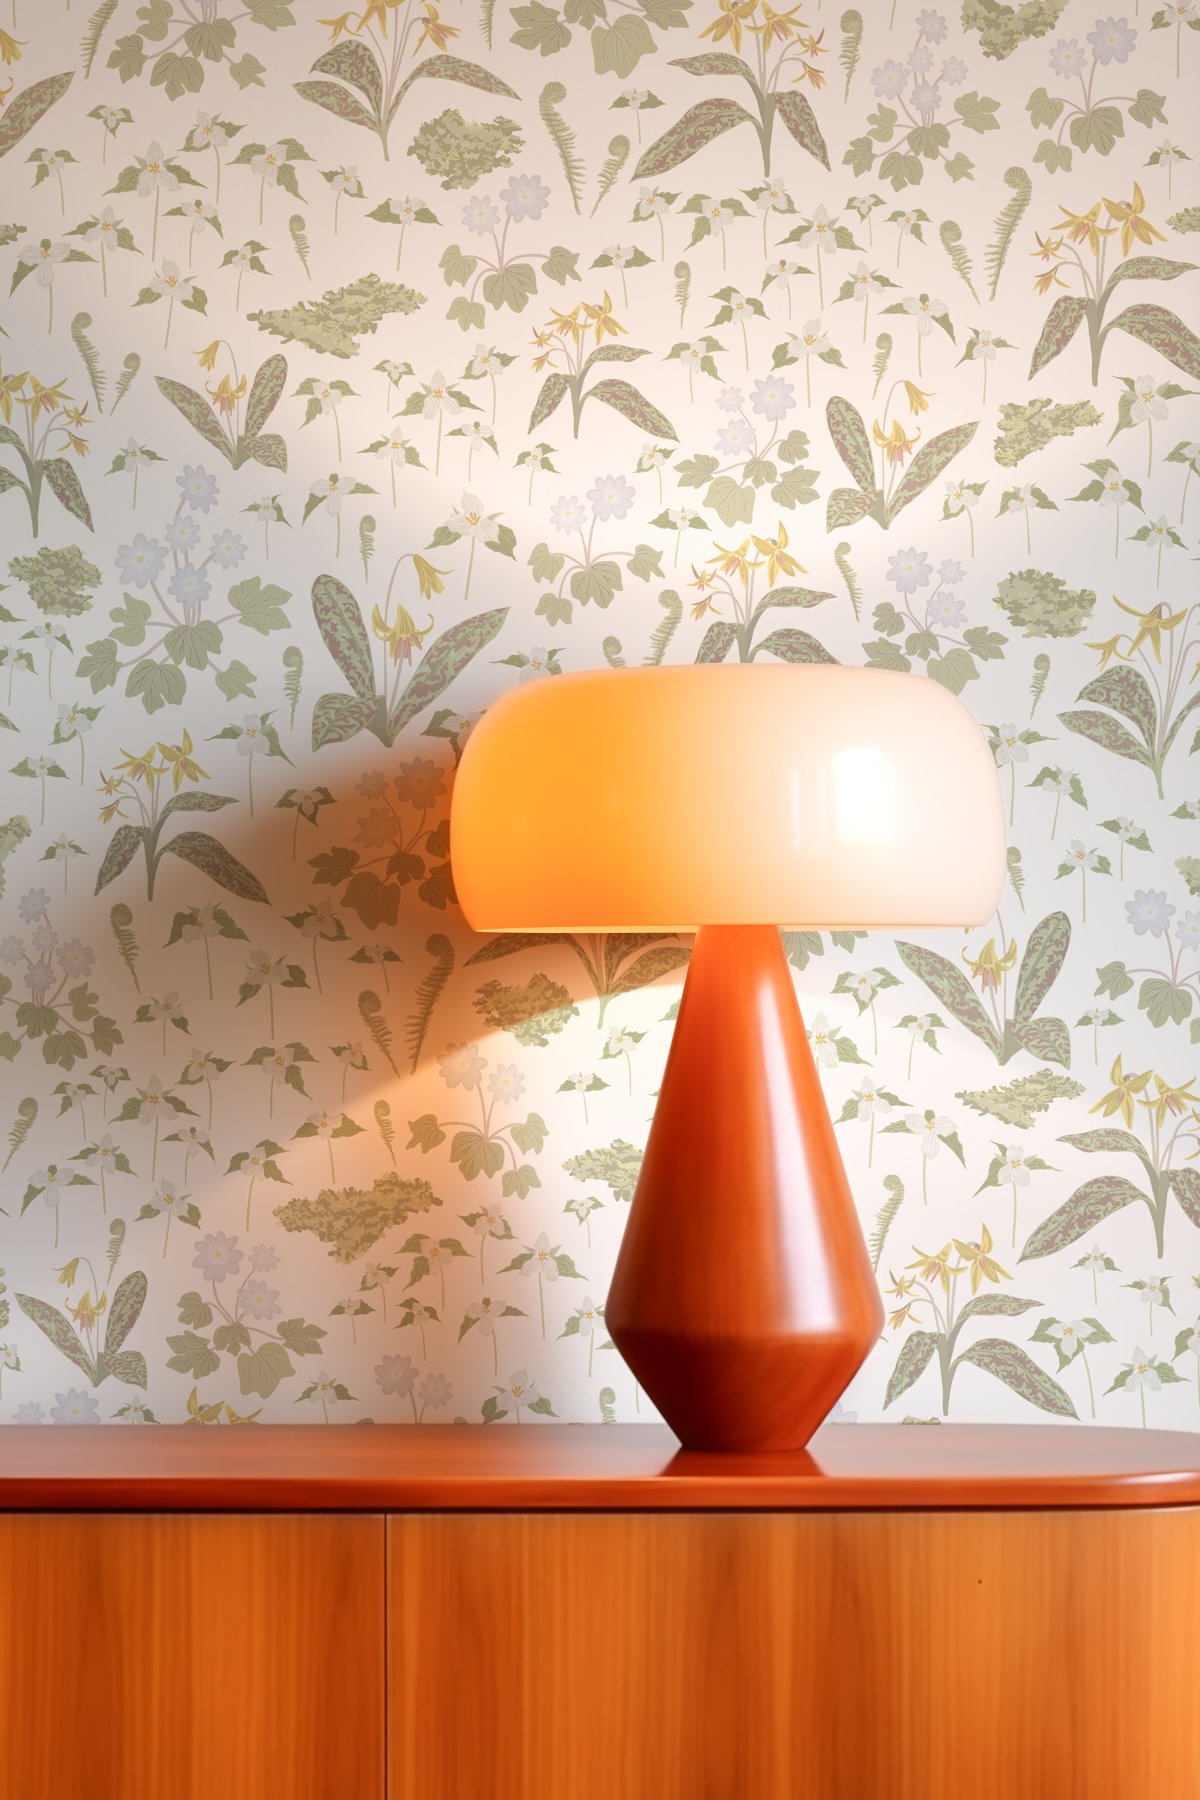 Kate Golding Forest Blooms (White) Wallpaper.  Modern wallcoverings and interior decor.  